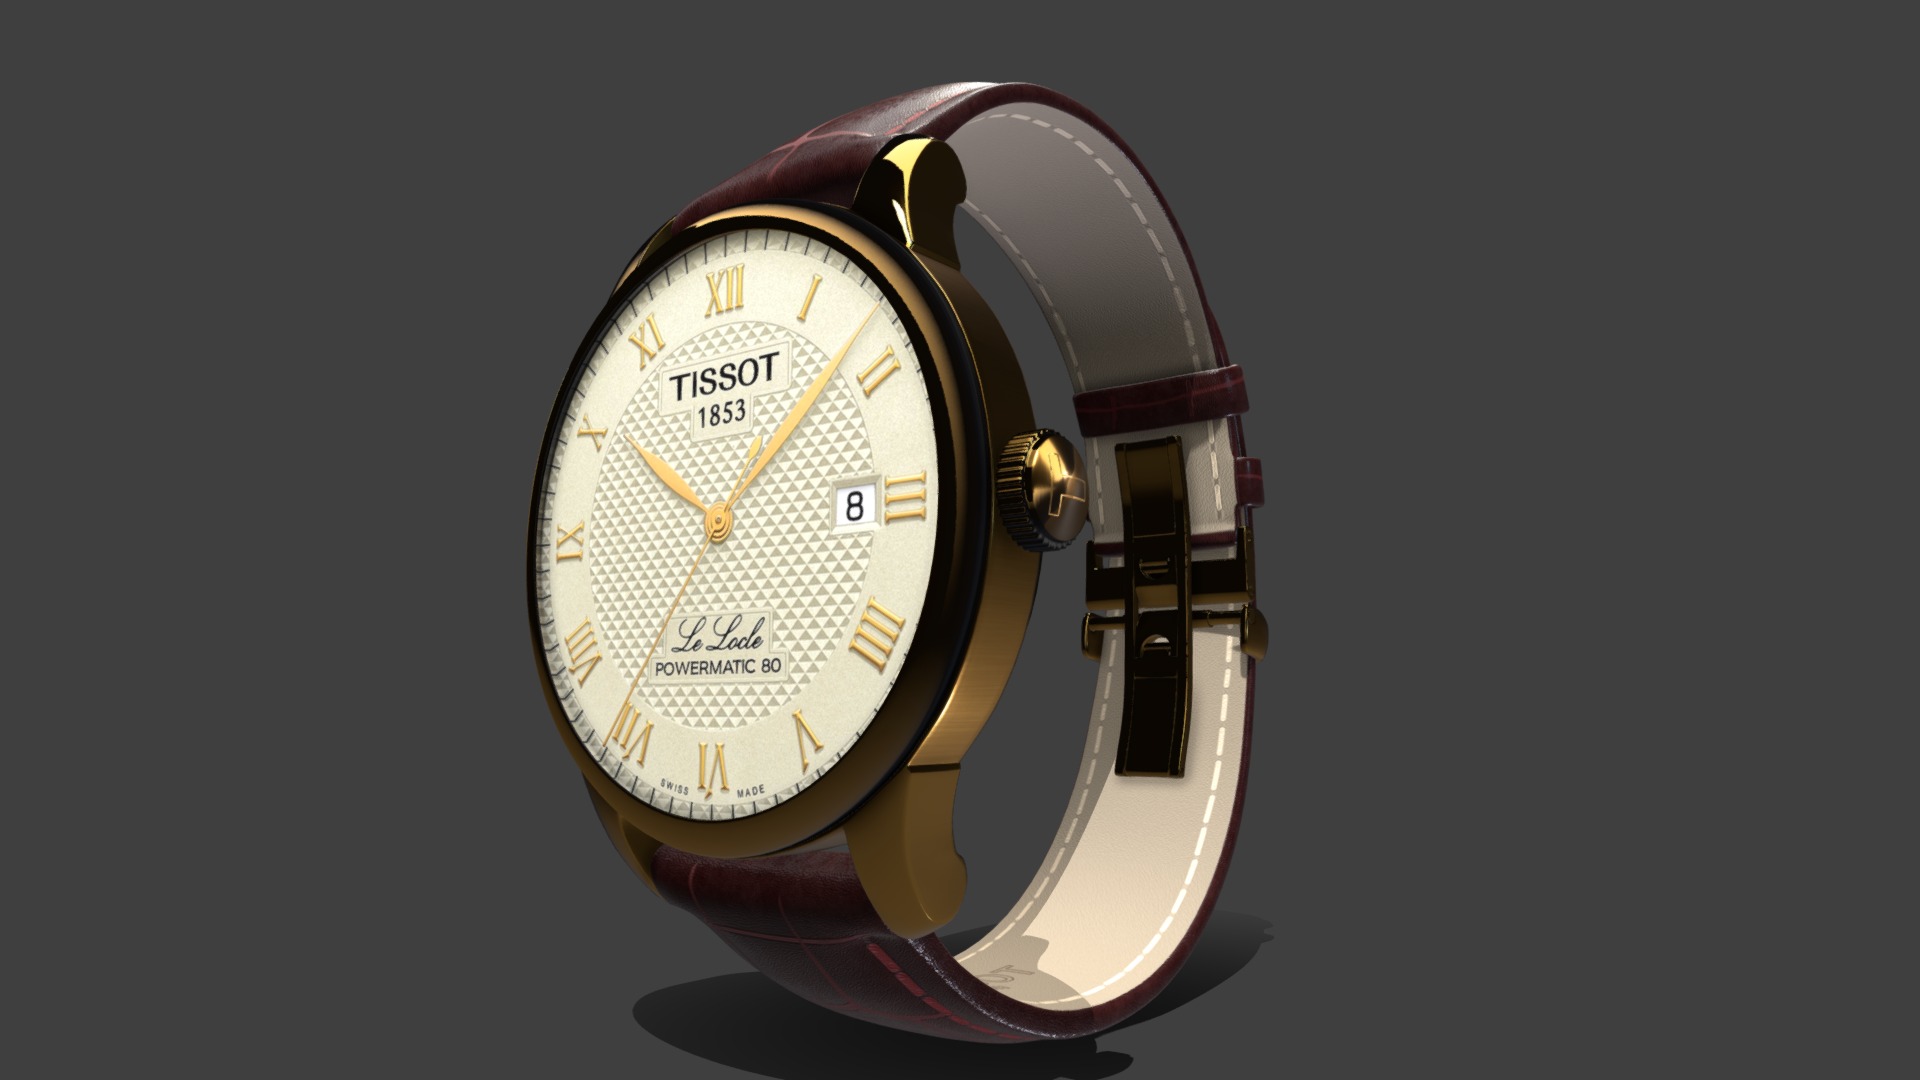 3D model TISSOT: Le Locle Powermatic 80 – Brown - This is a 3D model of the TISSOT: Le Locle Powermatic 80 - Brown. The 3D model is about a close up of a watch.